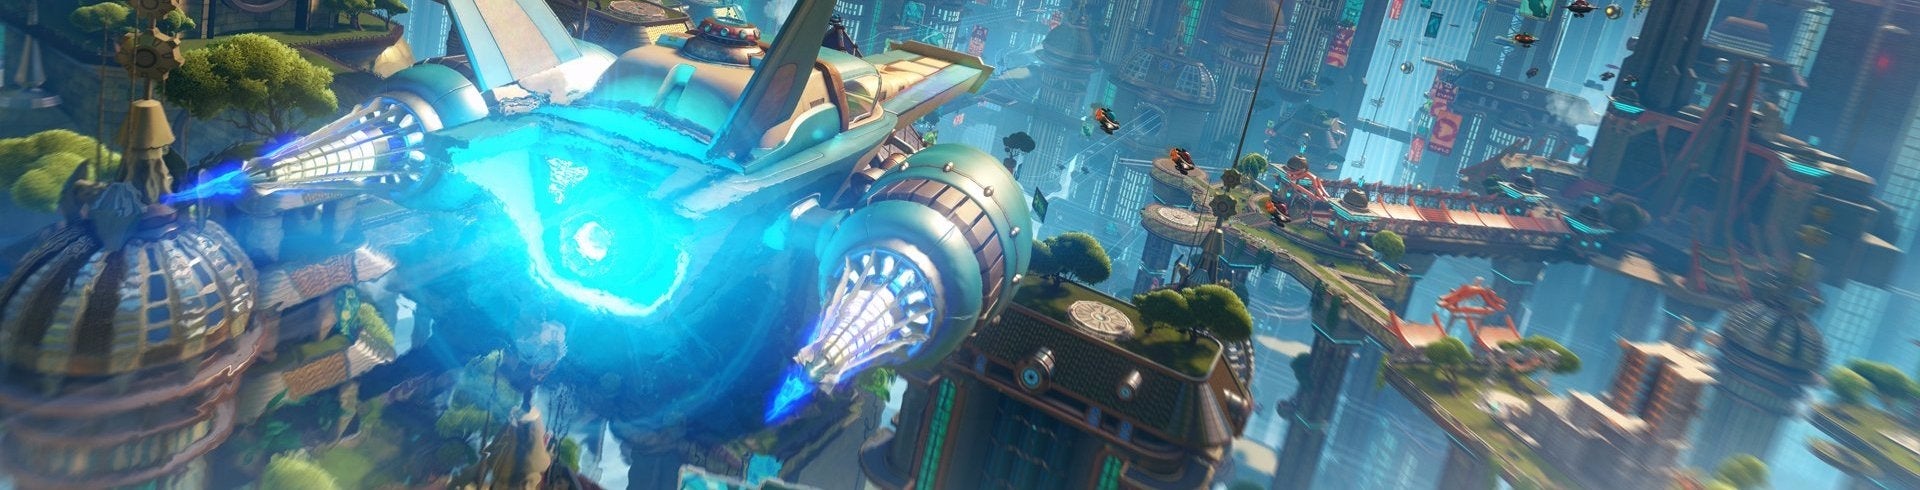 Image for Ratchet & Clank review